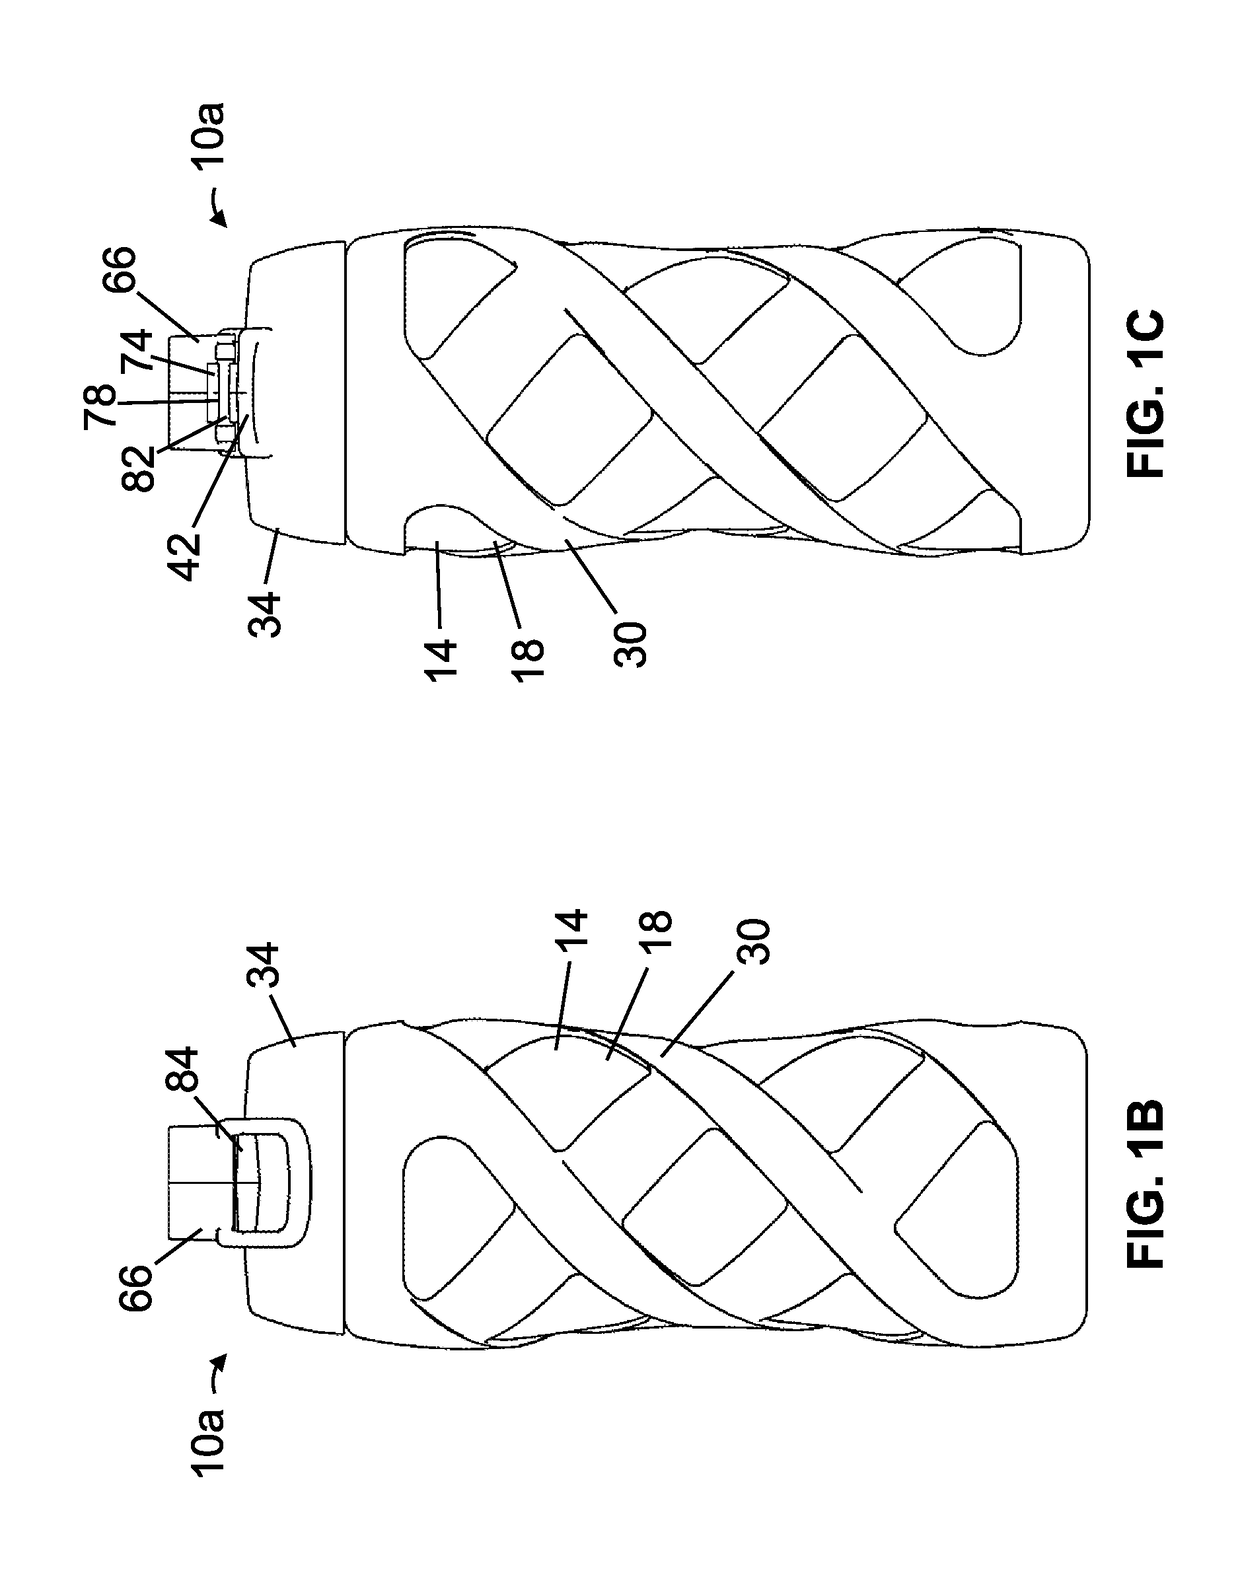 Liquid containers having filters and related methods